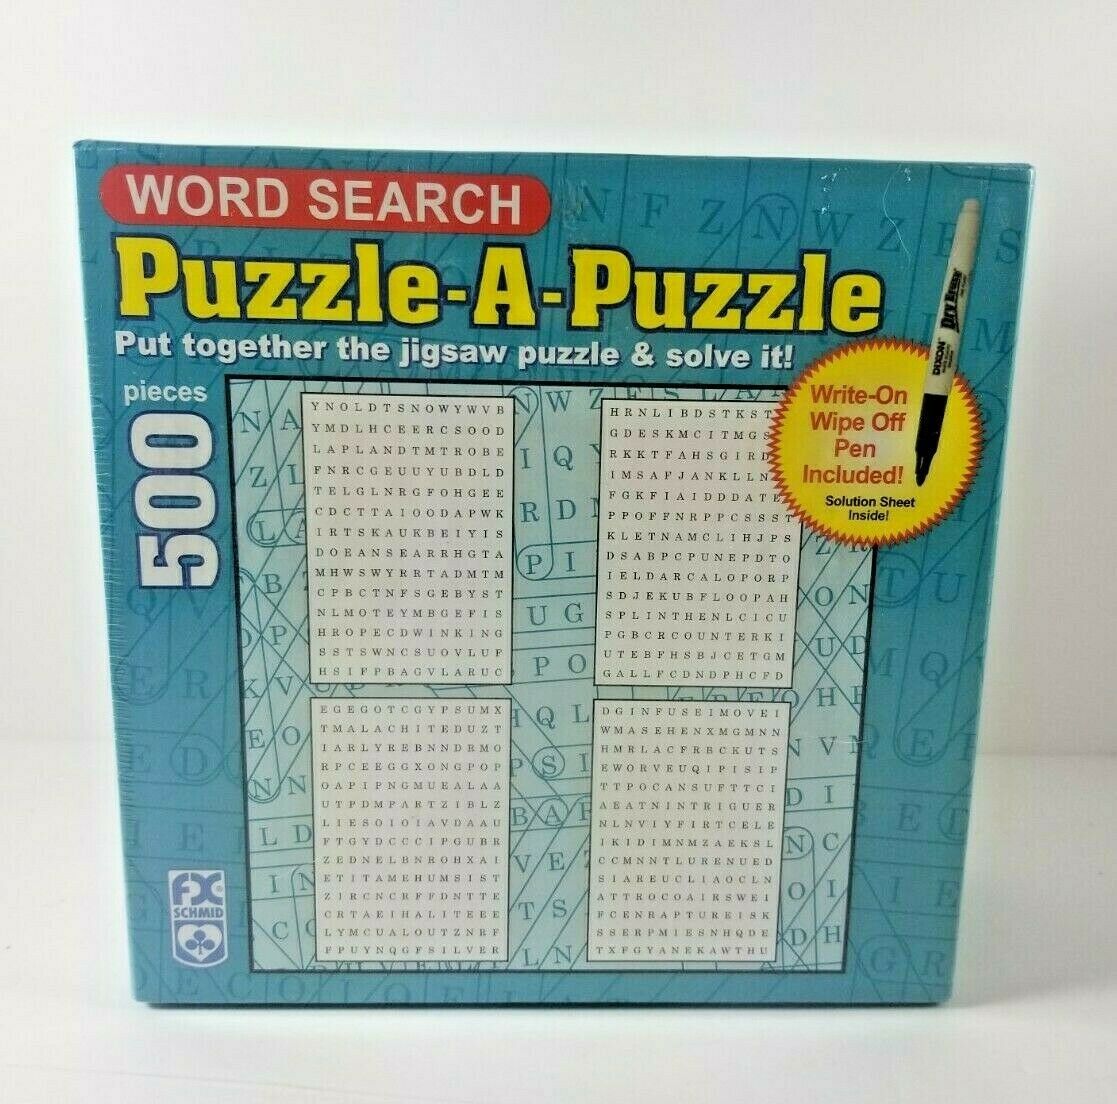 New Word Search Puzzle A Puzzle 500 piece Jigsaw Write on and Wipe off SCHMID - $24.99